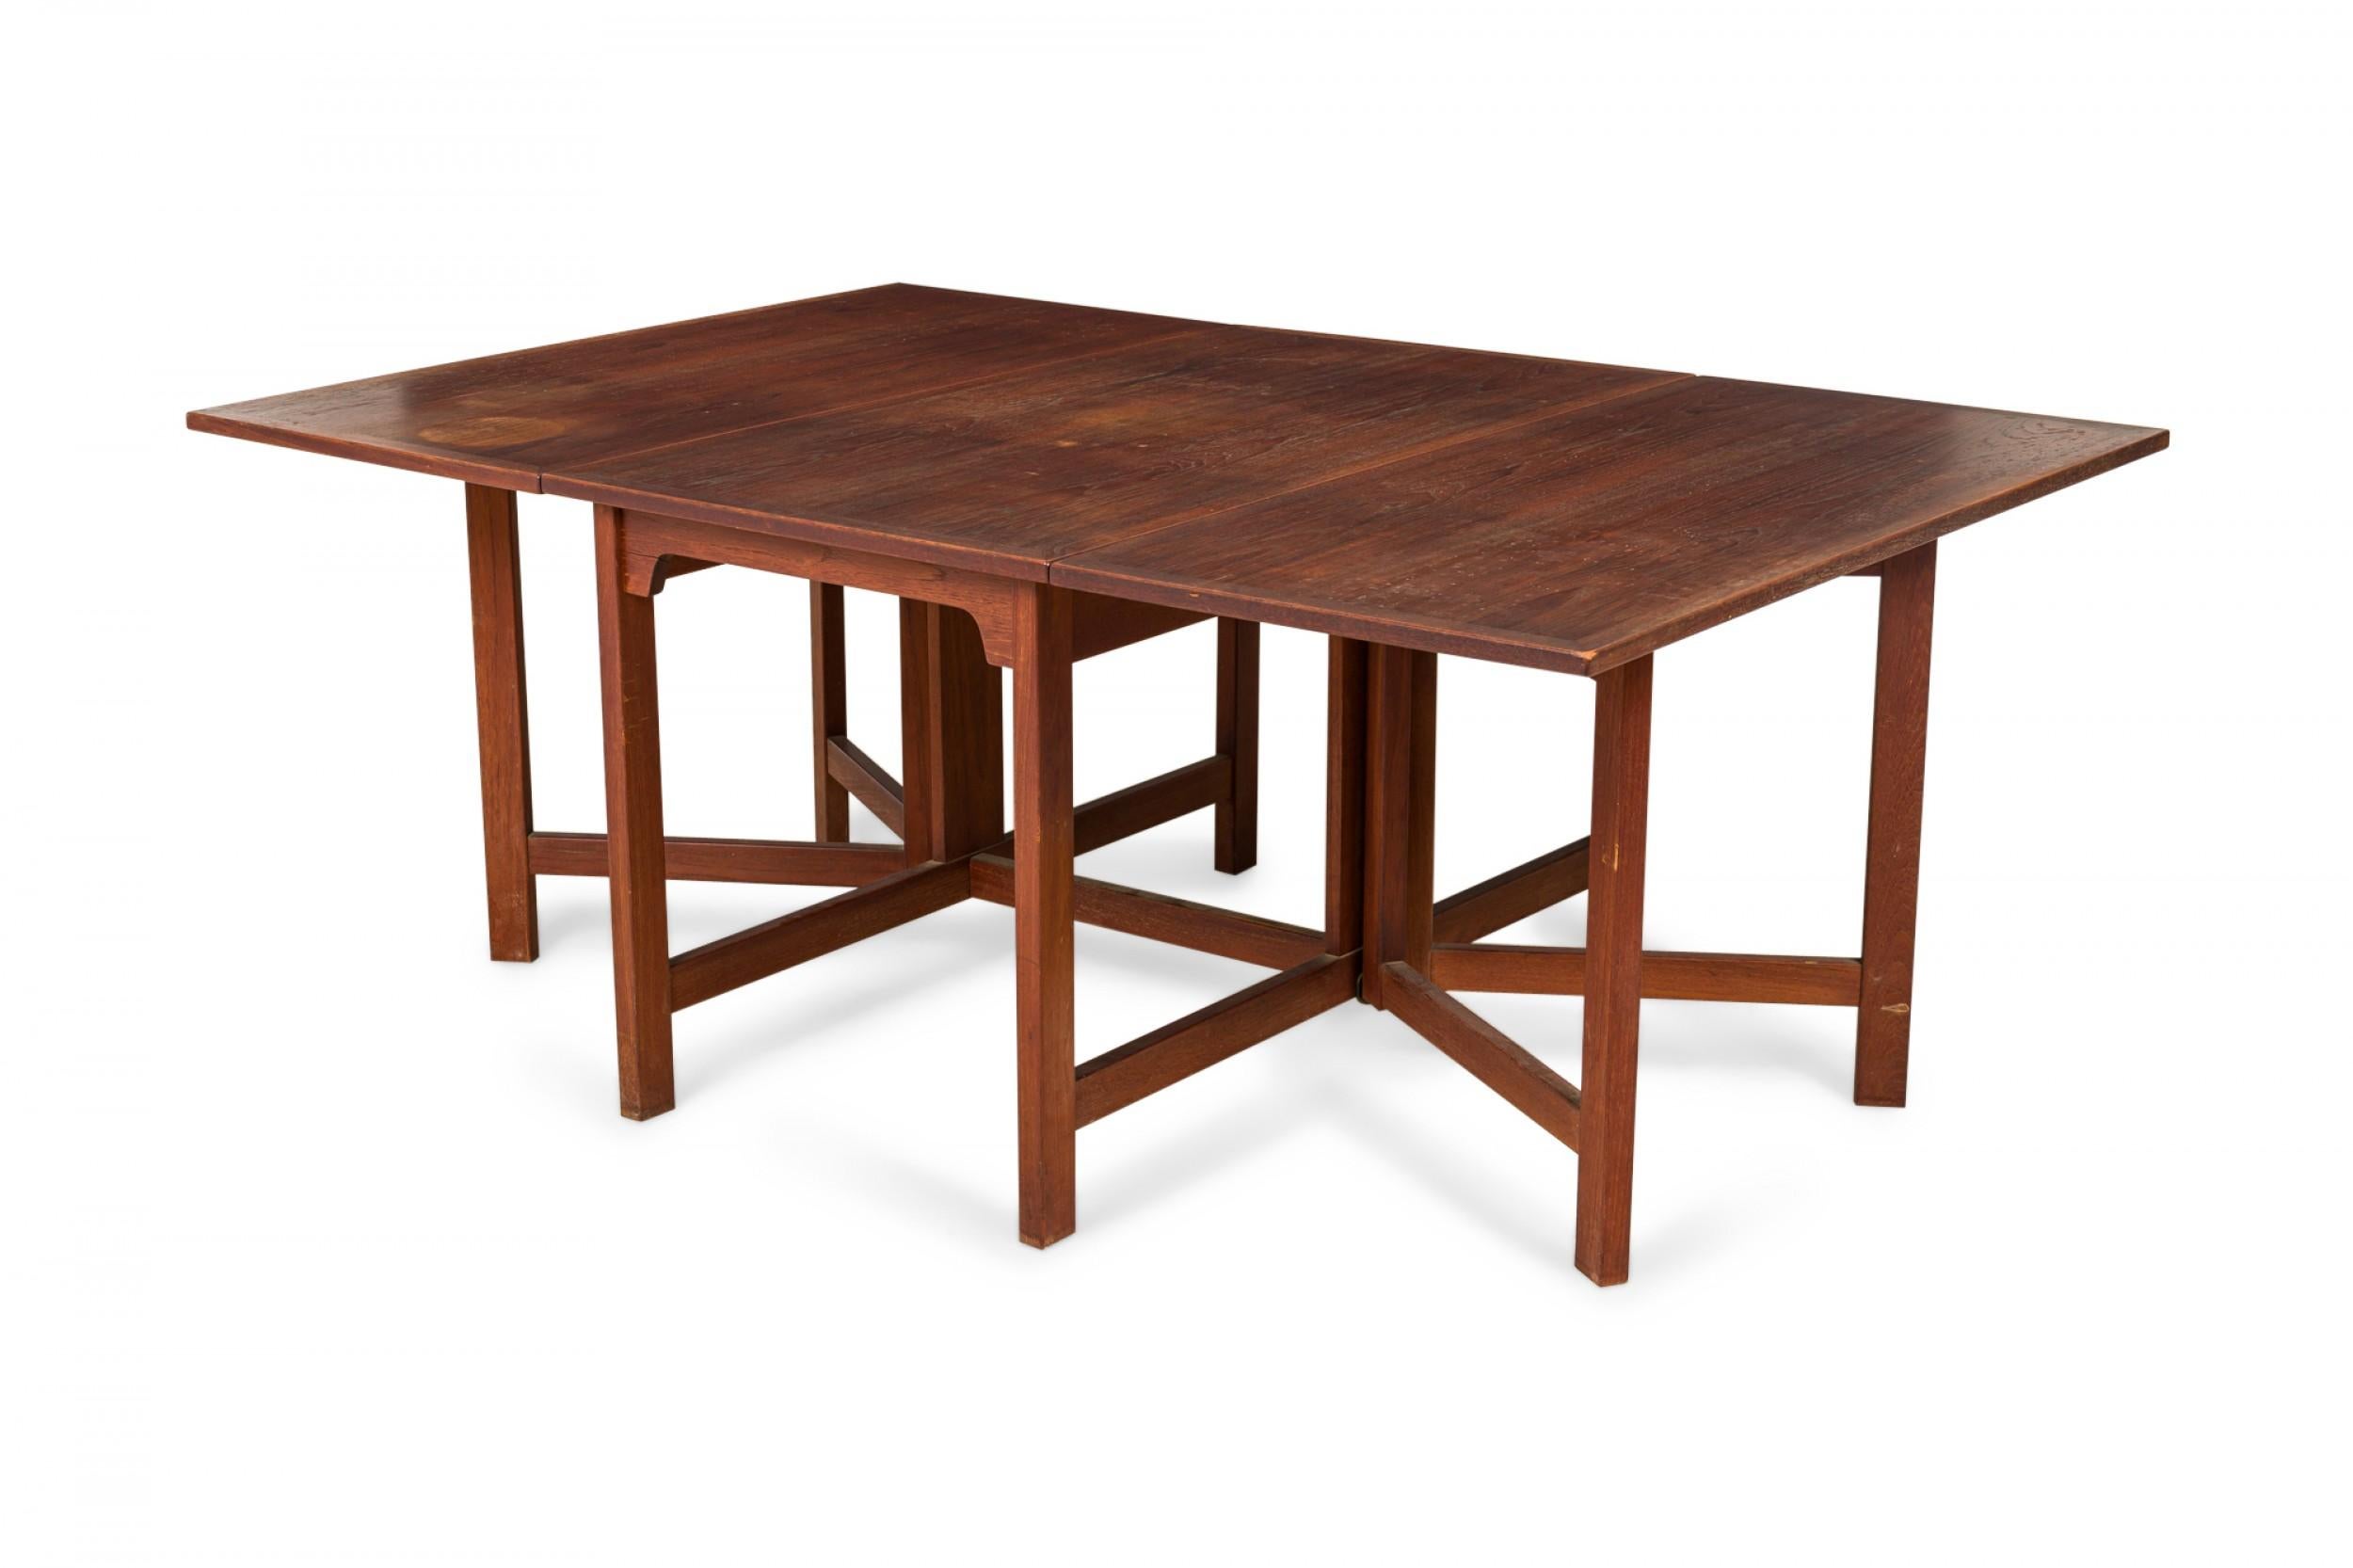 Danish Mid-Century 3-piece teak dining table set comprised of a center rectangular drop leaf table and two demilune tables that can be arranged to create a single large oval dining table, or can be used independently of one another. (BØRGE MOGENSEN,